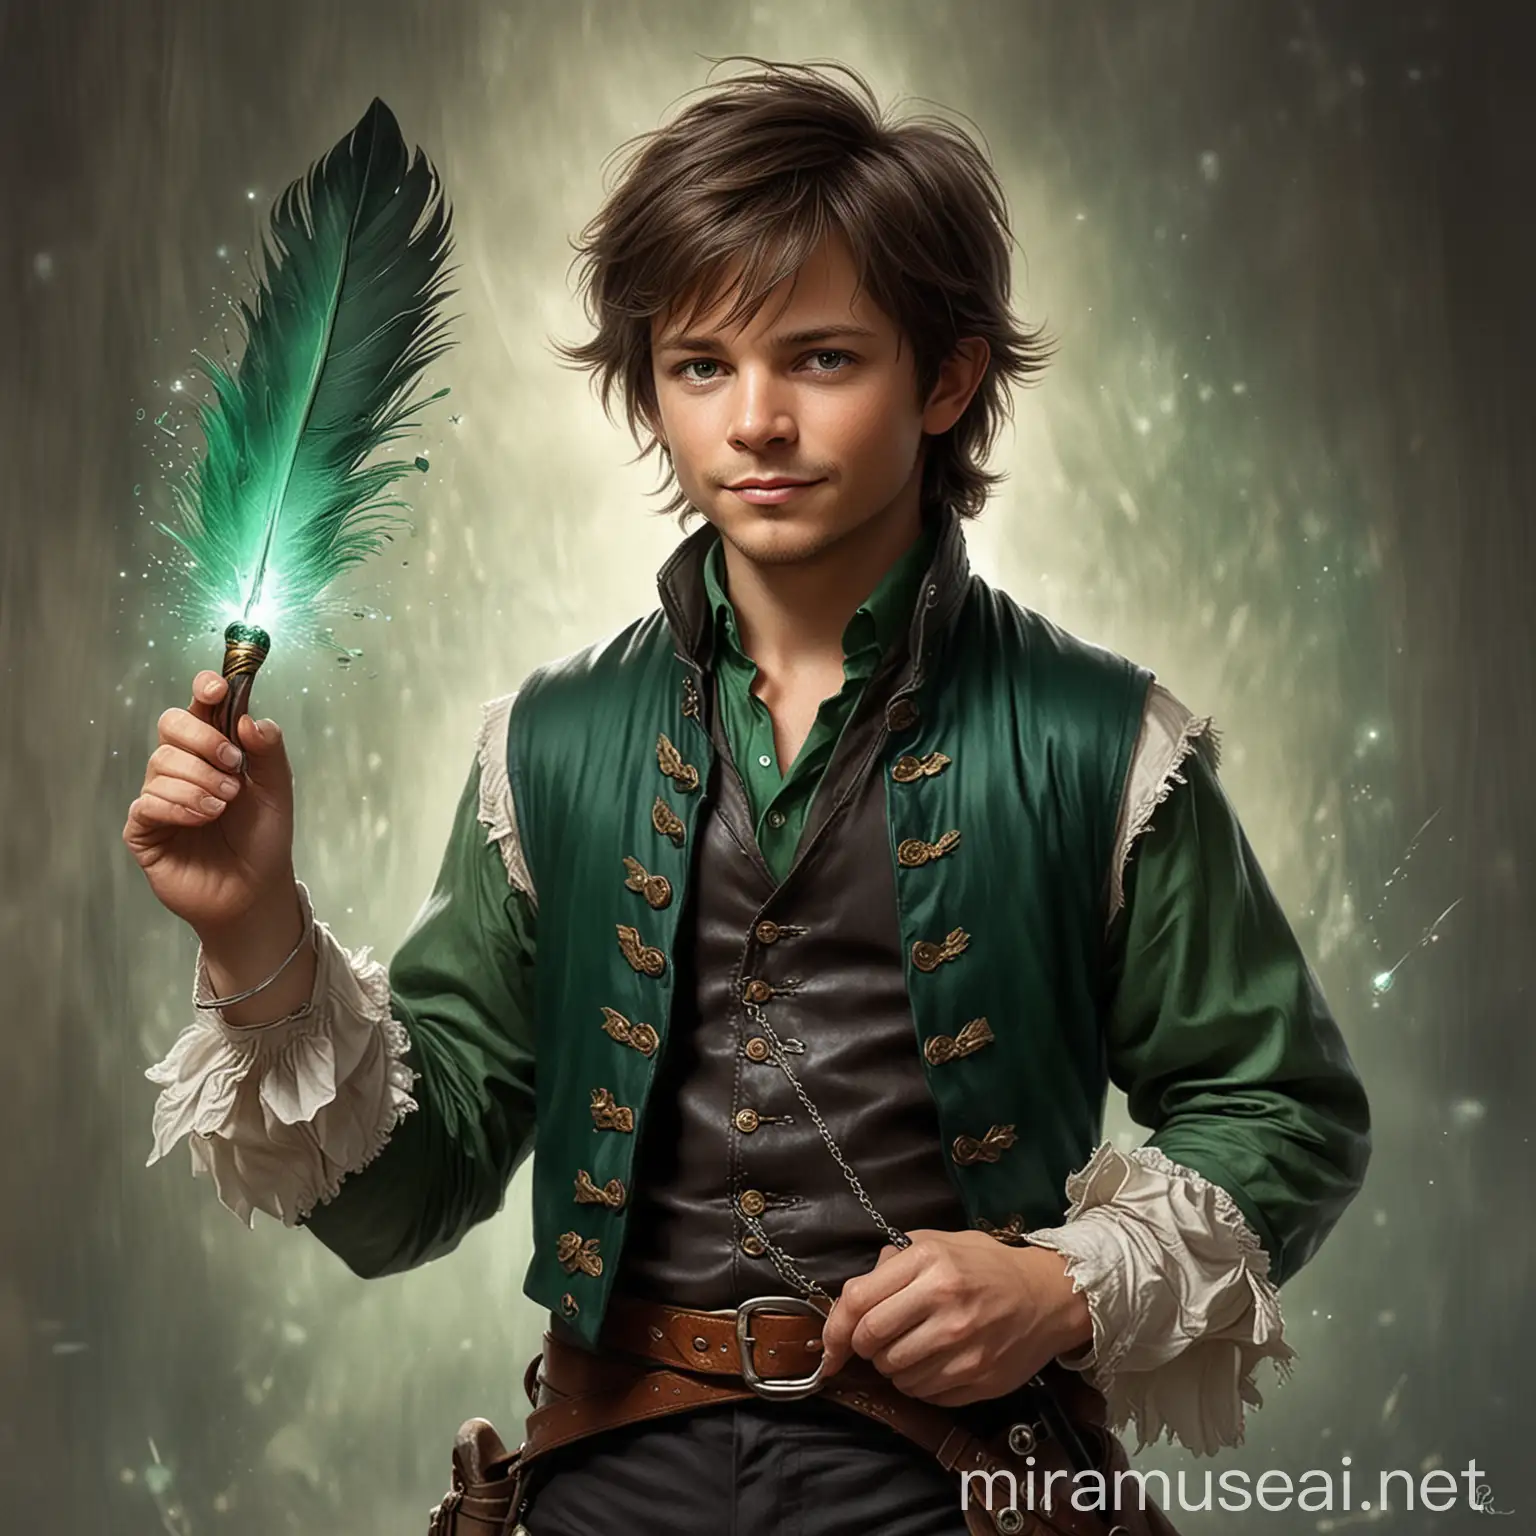 Cheerful Halfling Bard Poet with Emerald Feather in Magical Aura